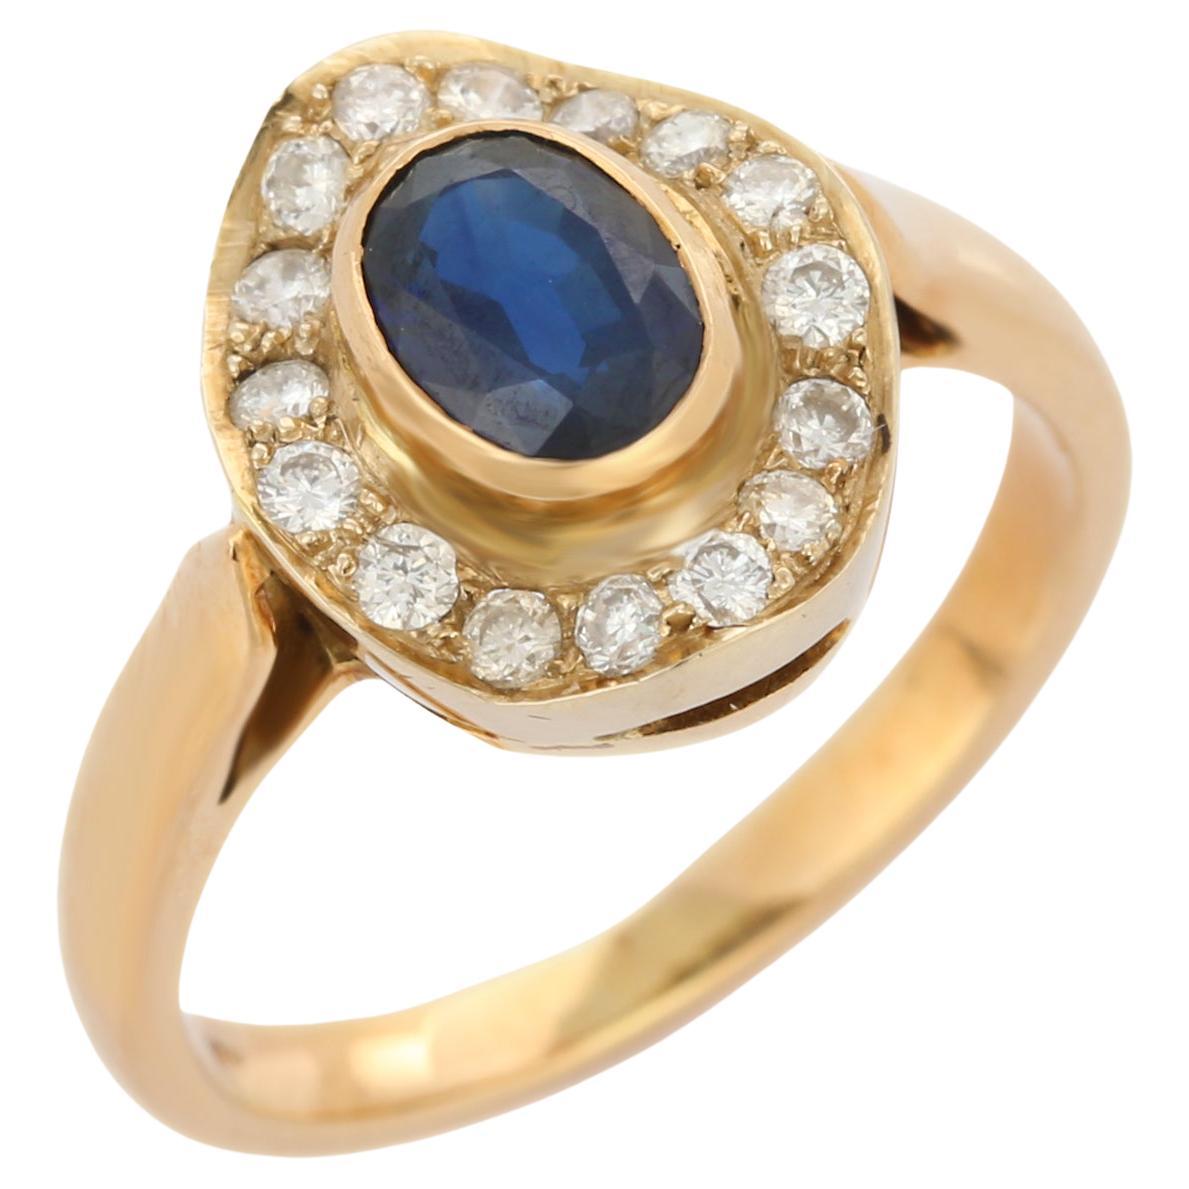 For Sale:  Alluring 18K Solid Yellow Gold Blue Sapphire Diamond Ring, Yellow Gold Ring